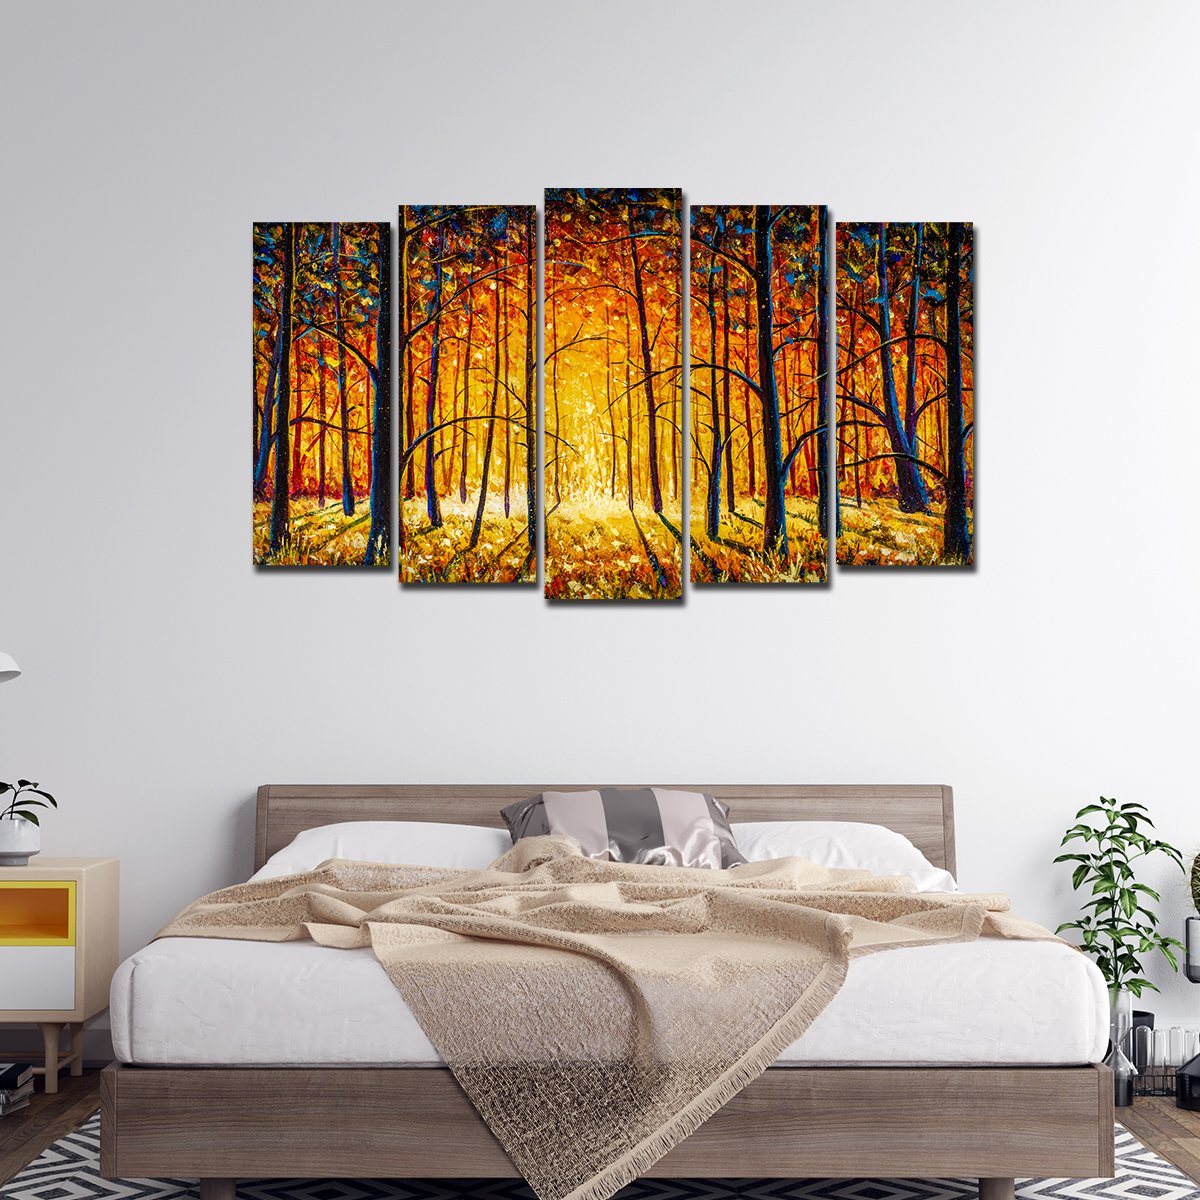 Shop Large Size Canvas wall Paintings at Vibecrafts